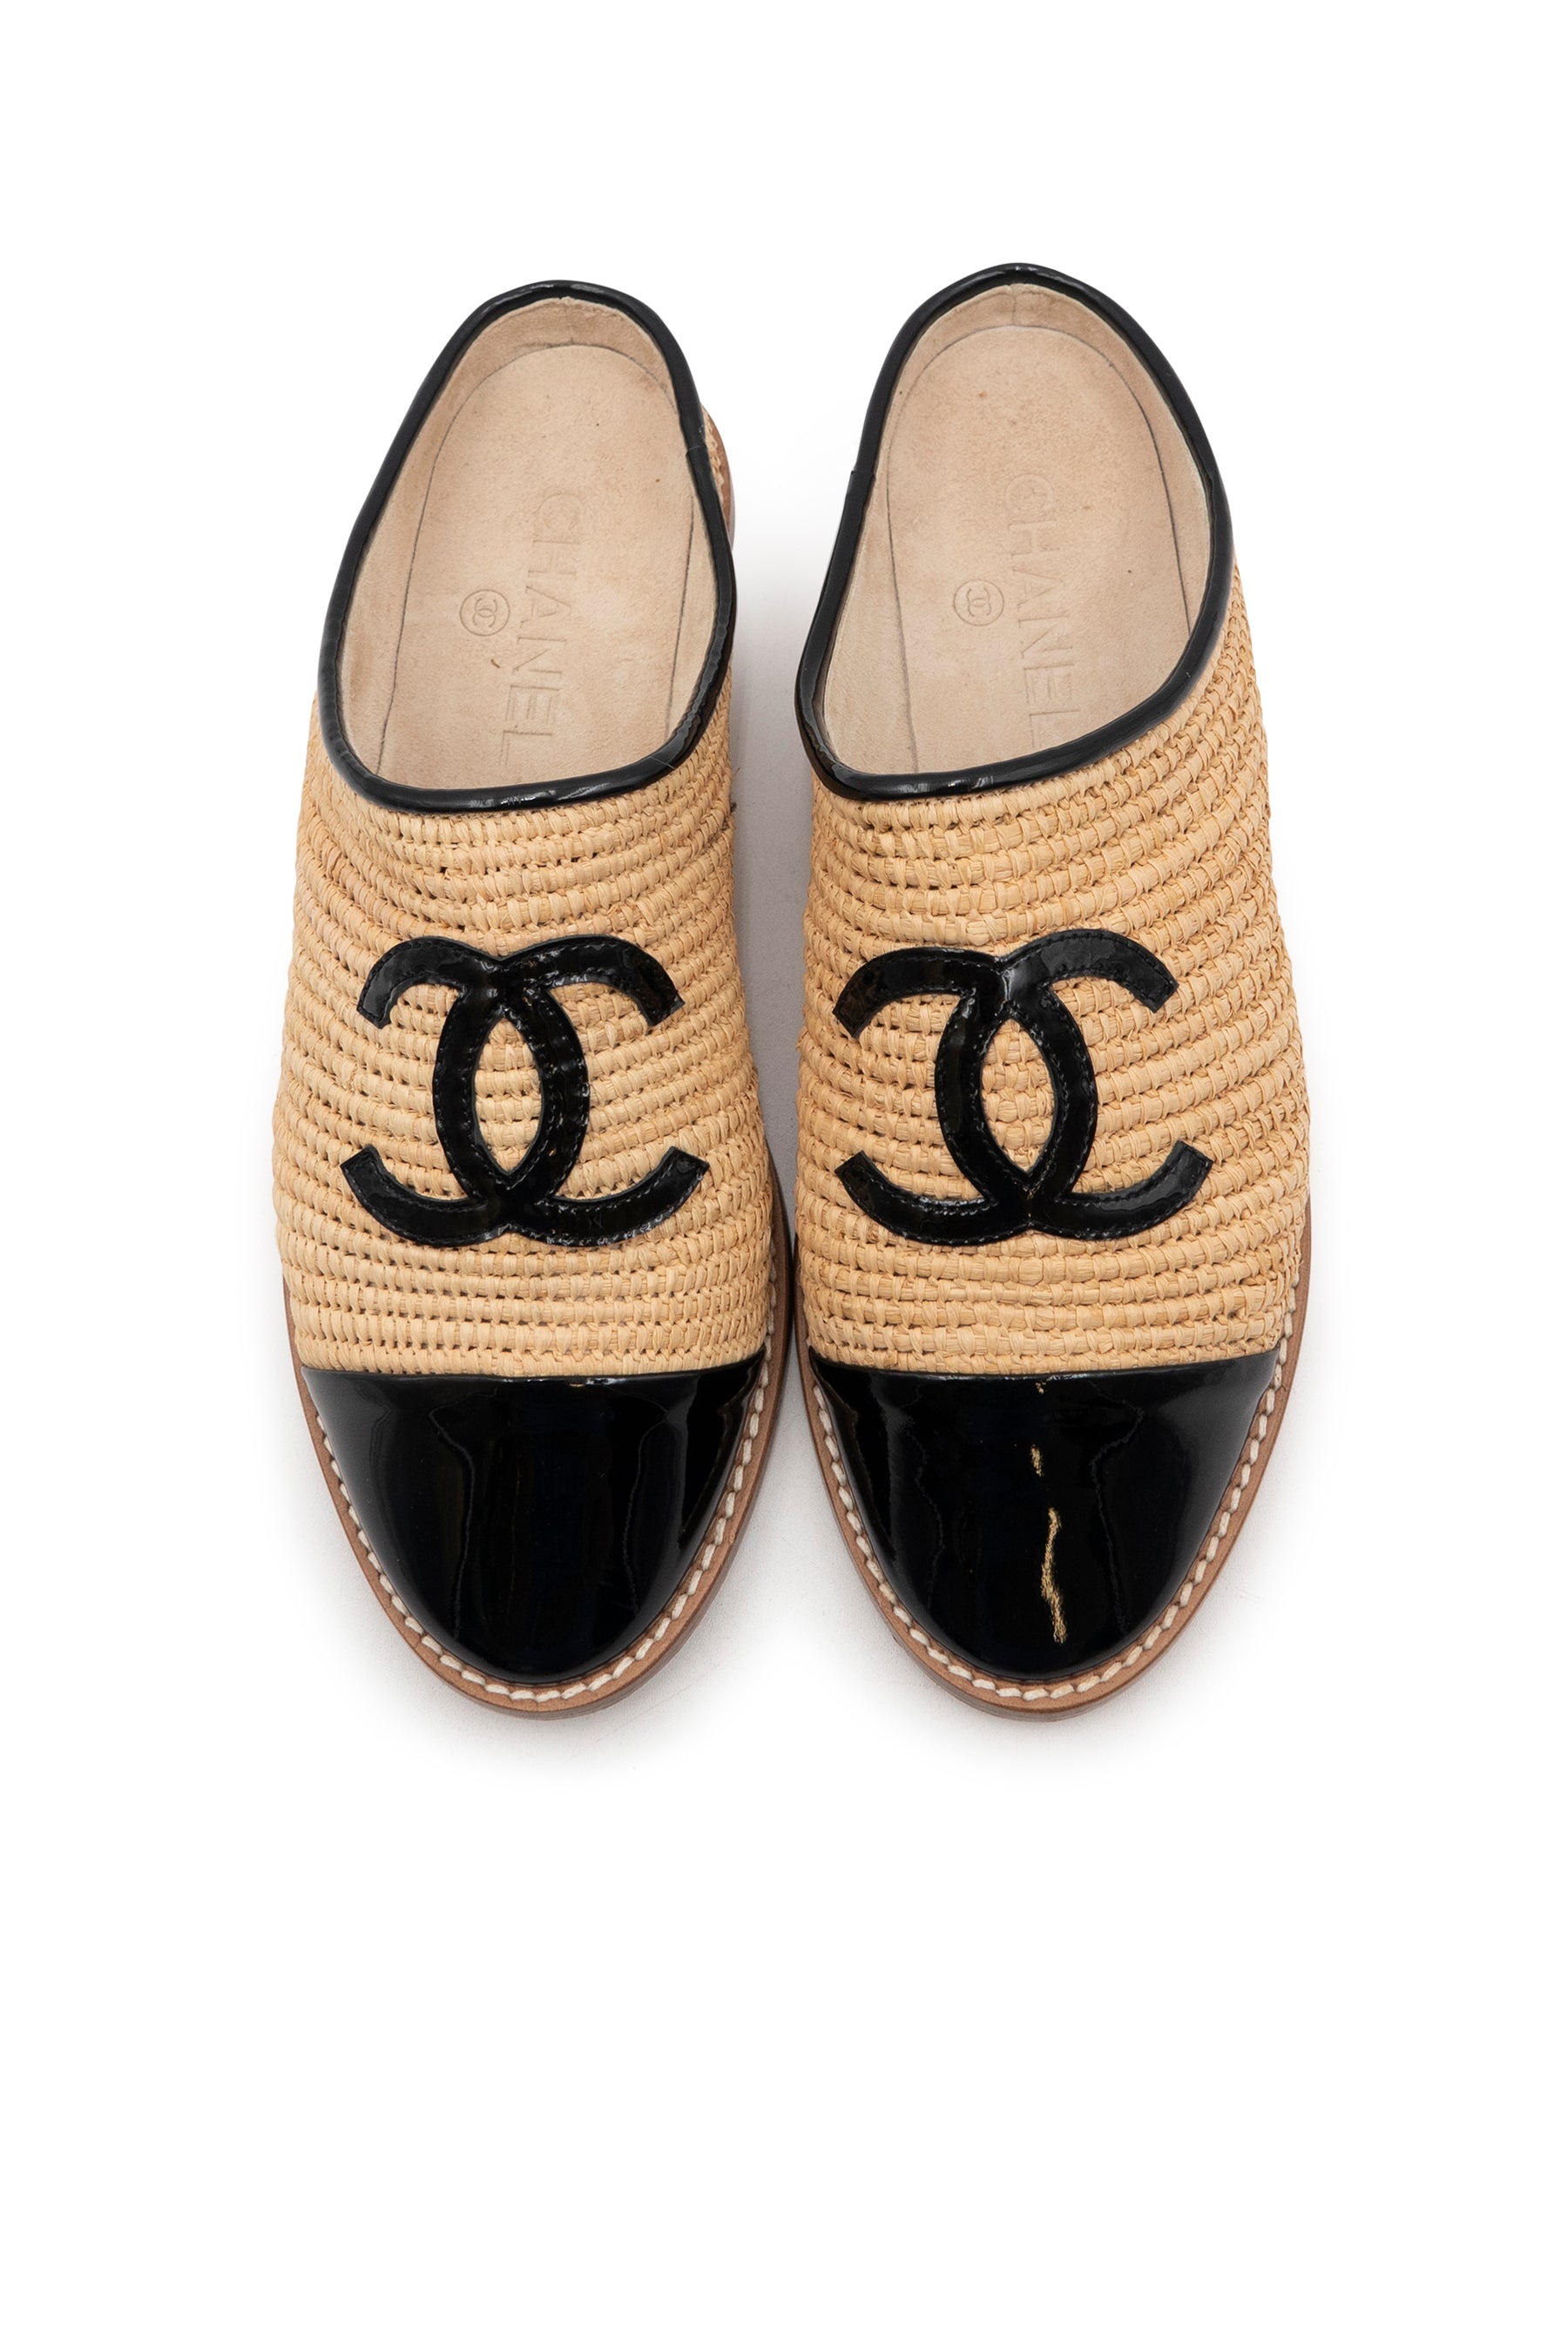 Chanel Raffia and Patent Leather Mules | '19 Cruise